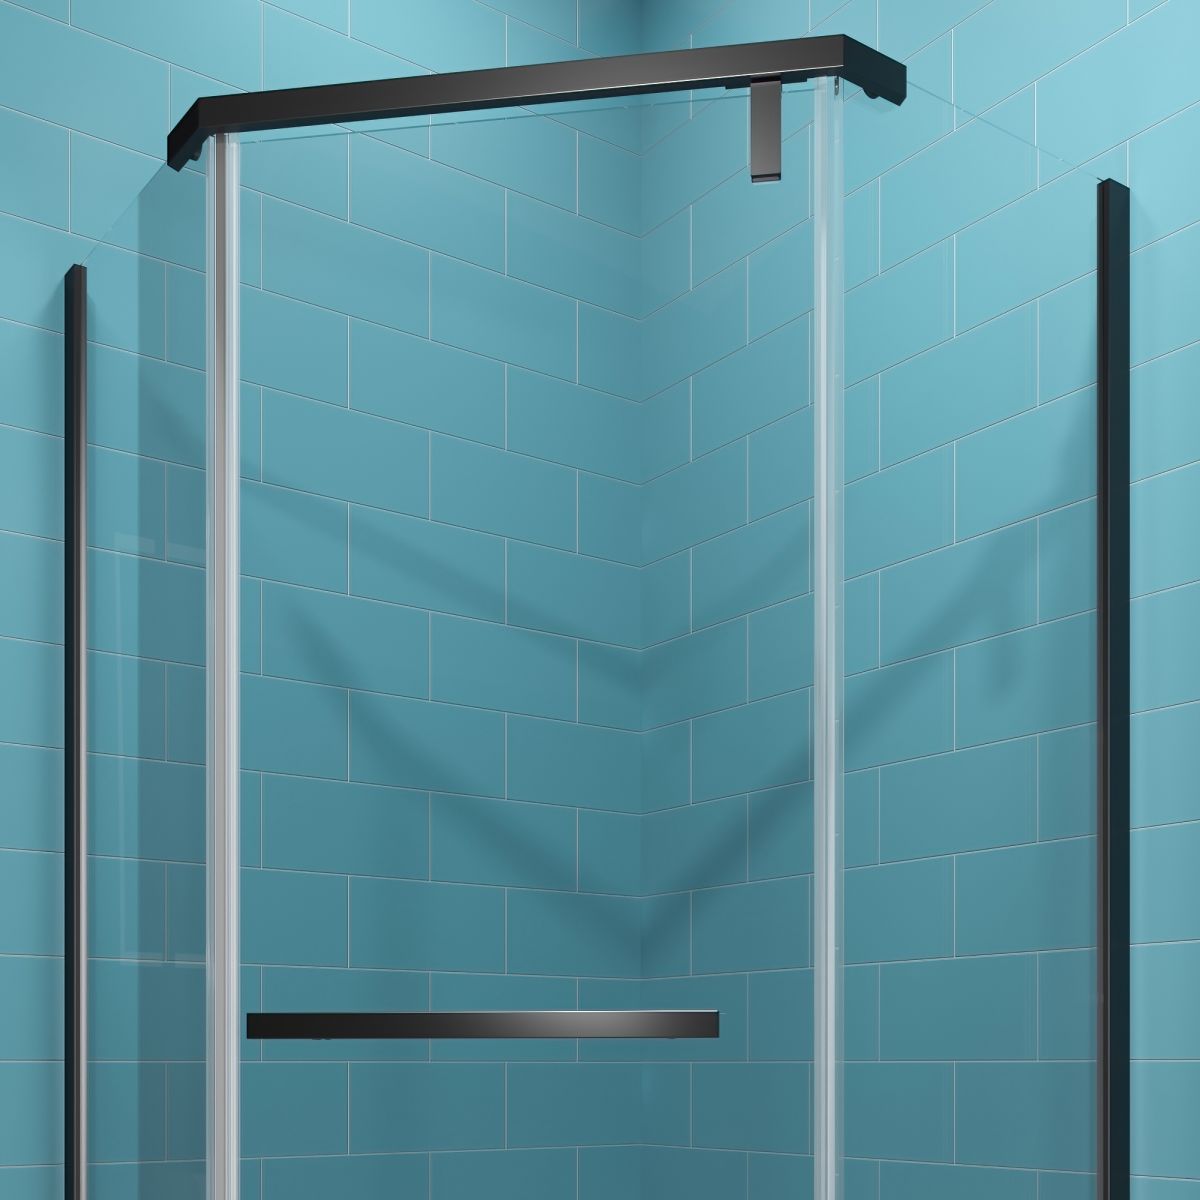 Prism Neo-Angle Frameless Shower Door 36 in. W x 72 in. H,Corner Shower Enclosure with 6mm Clear Glass,Pivot Shower Doors,Matte Black